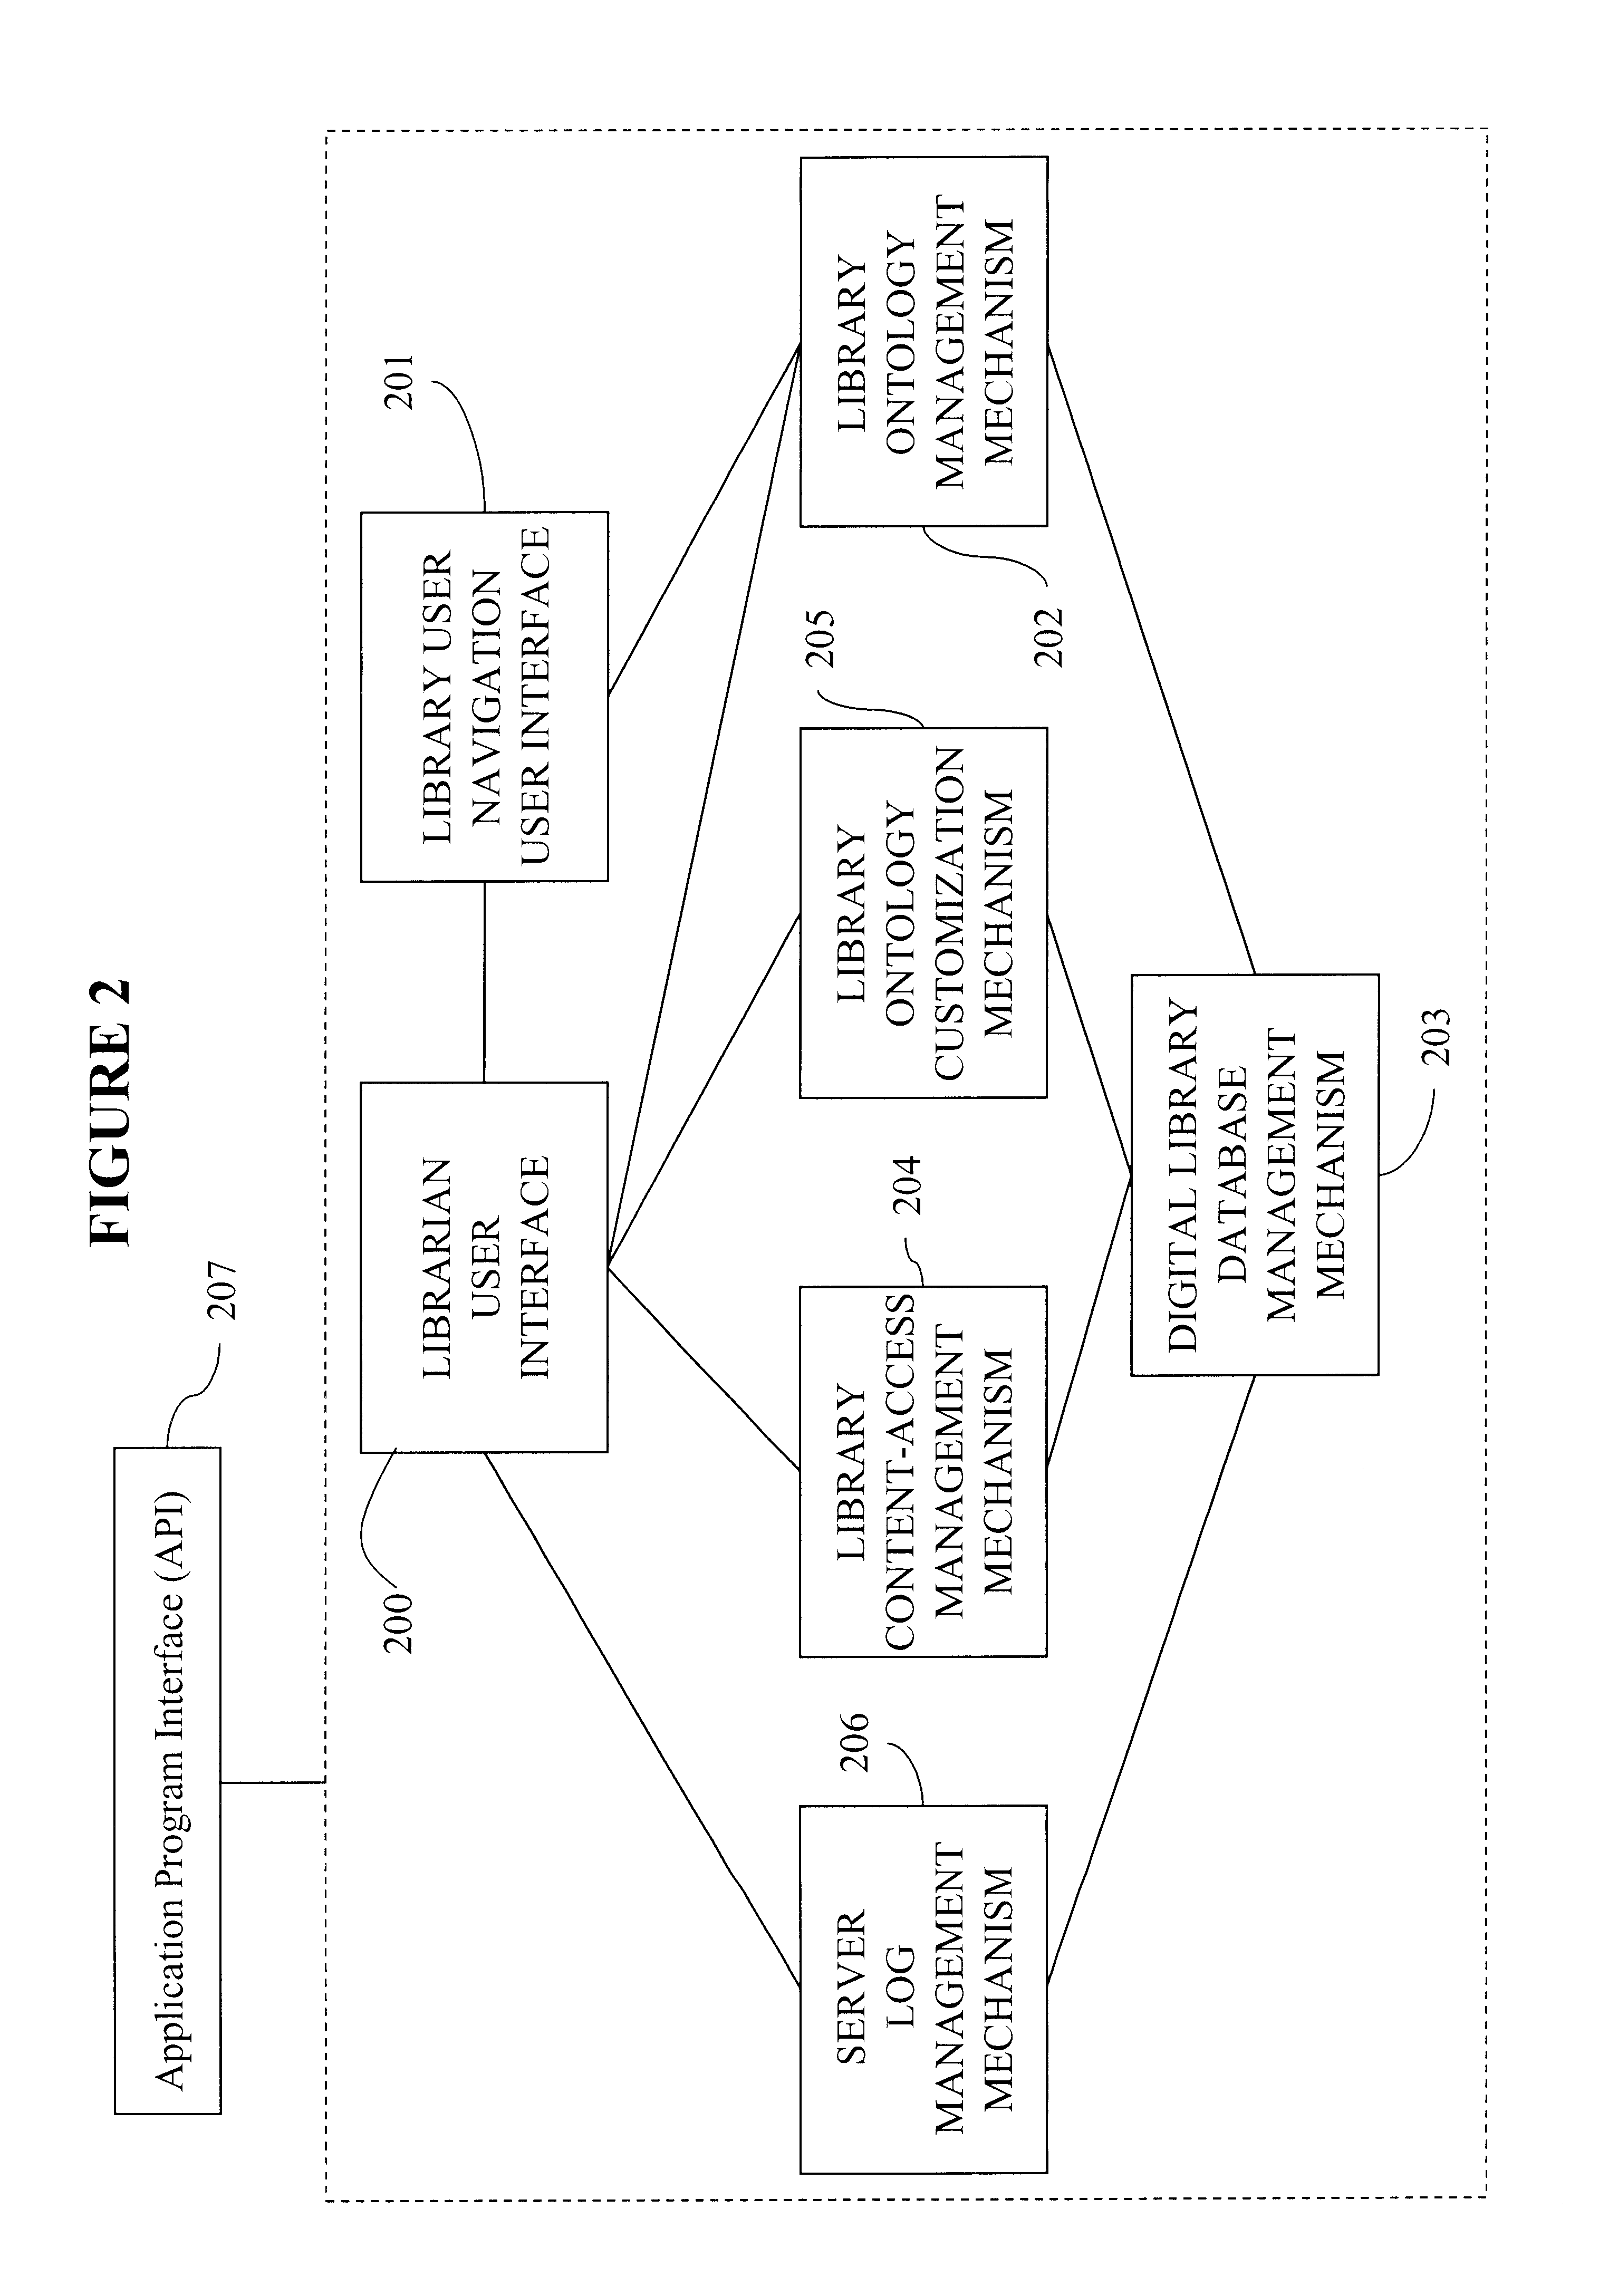 System, method, and computer program product for managing access to and navigation through large-scale information spaces